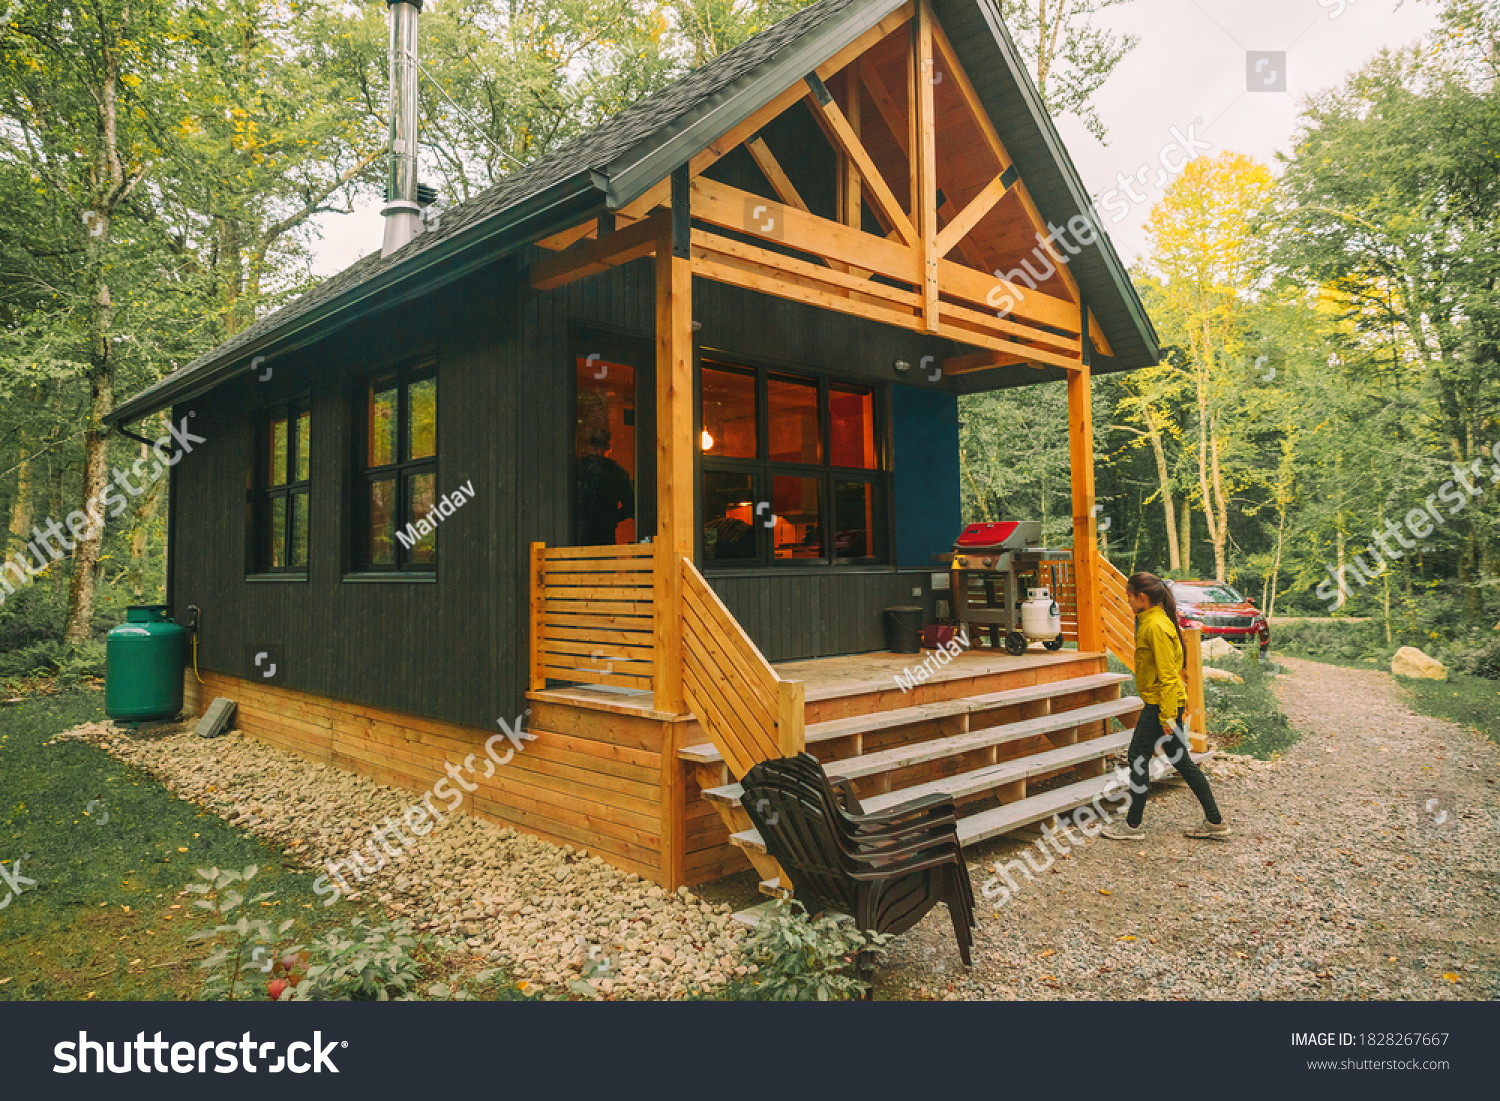 Vacation rental forest lodge countryside cabin by the lake for holidays in the wilderness. Woman entering her house home away from home. #1828267667